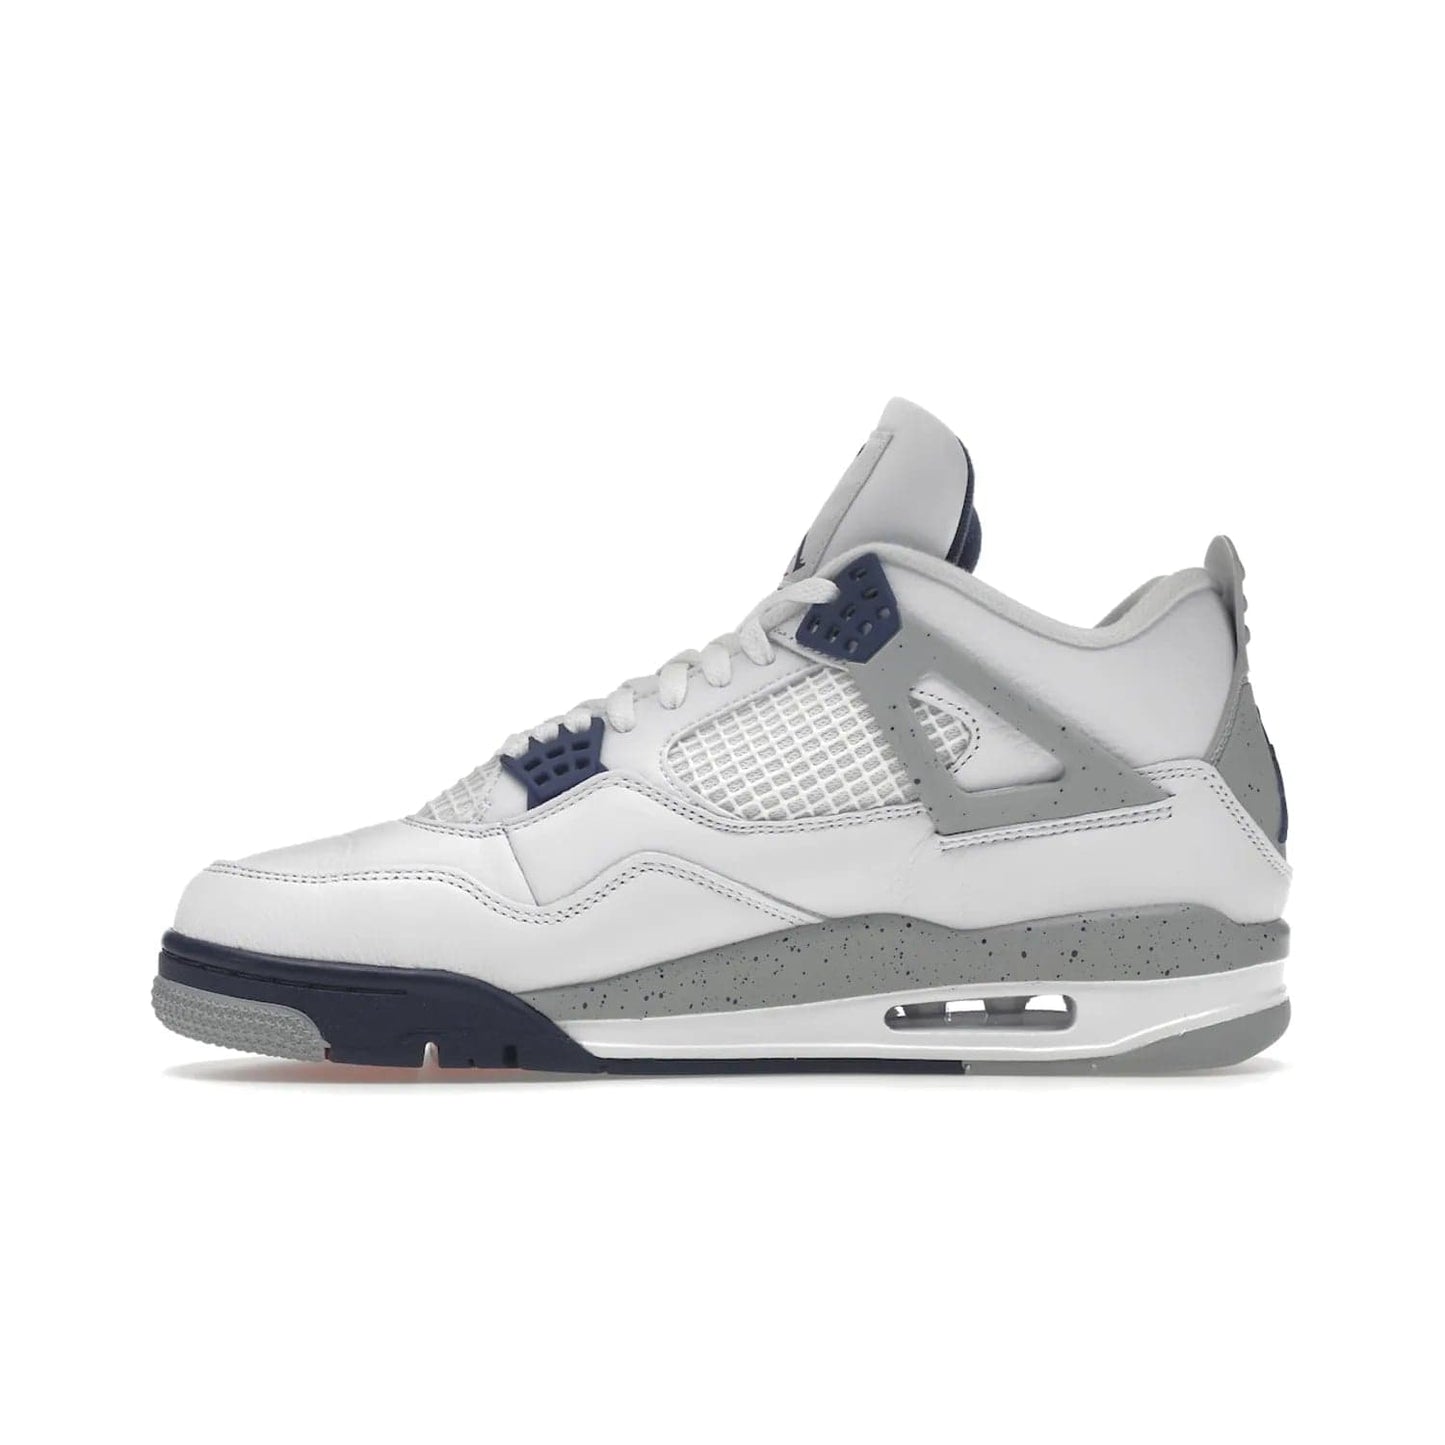 Jordan 4 Retro Midnight Navy - Image 19 - Only at www.BallersClubKickz.com - Shop the Air Jordan Retro 4 White Midnight Navy. Stand out with a classic white leather upper, black support wings, midnight navy eyelets, and Crimson Jumpman tongue tag. Unbeatable comfort with two-tone polyurethane midsole with encapsulated Air technology. Get yours before October 29th, 2022.